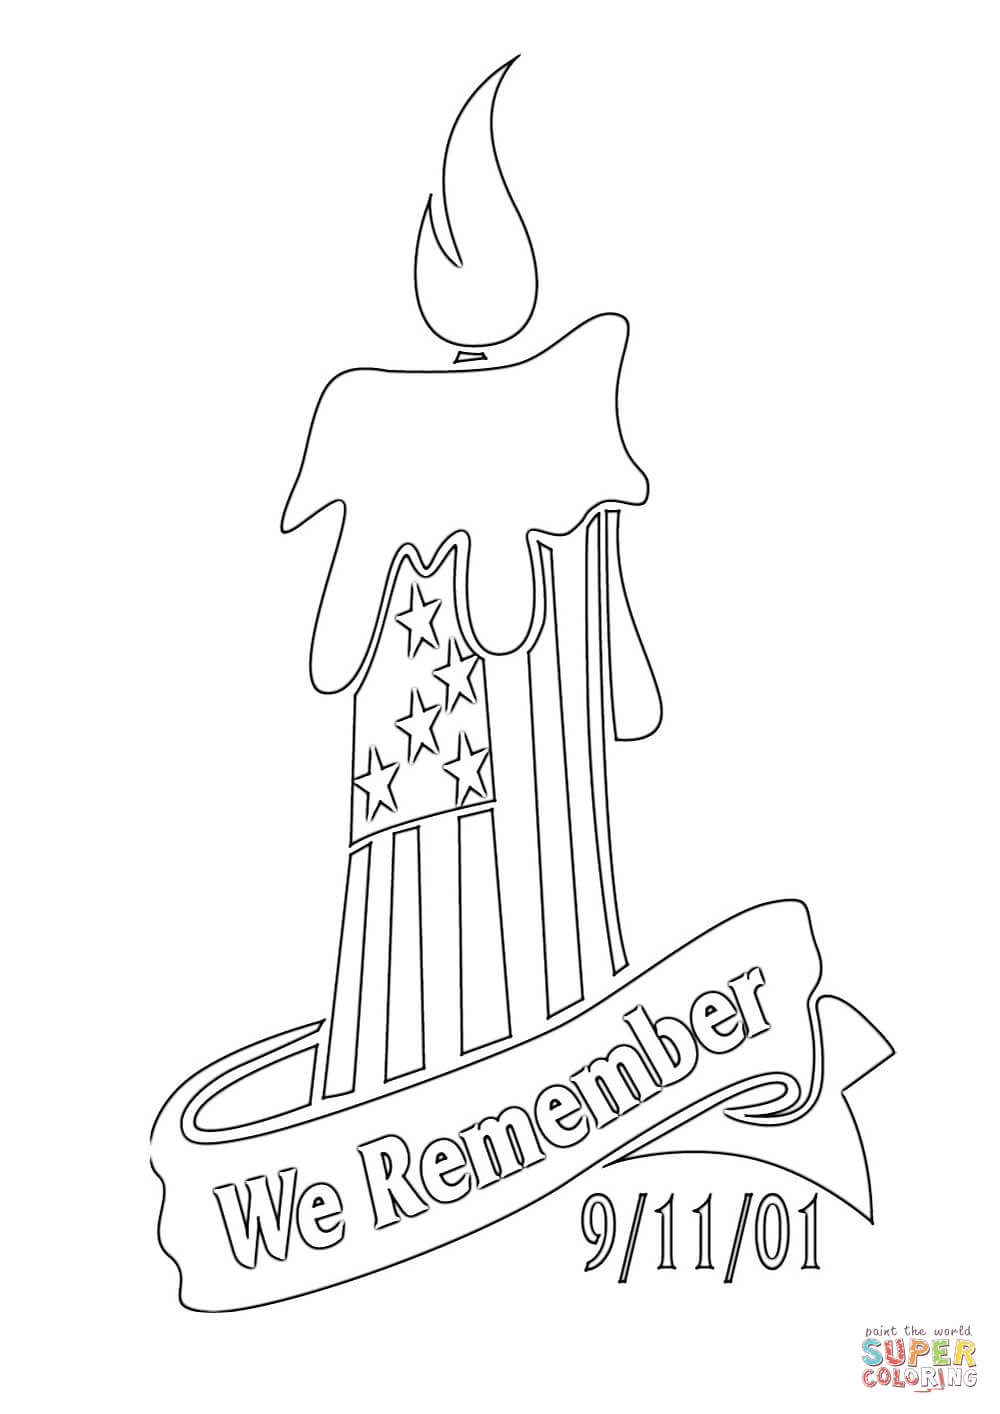 Coloring Pages For September We Remember 9 11 01 Coloring Page Free Printable Coloring Pages